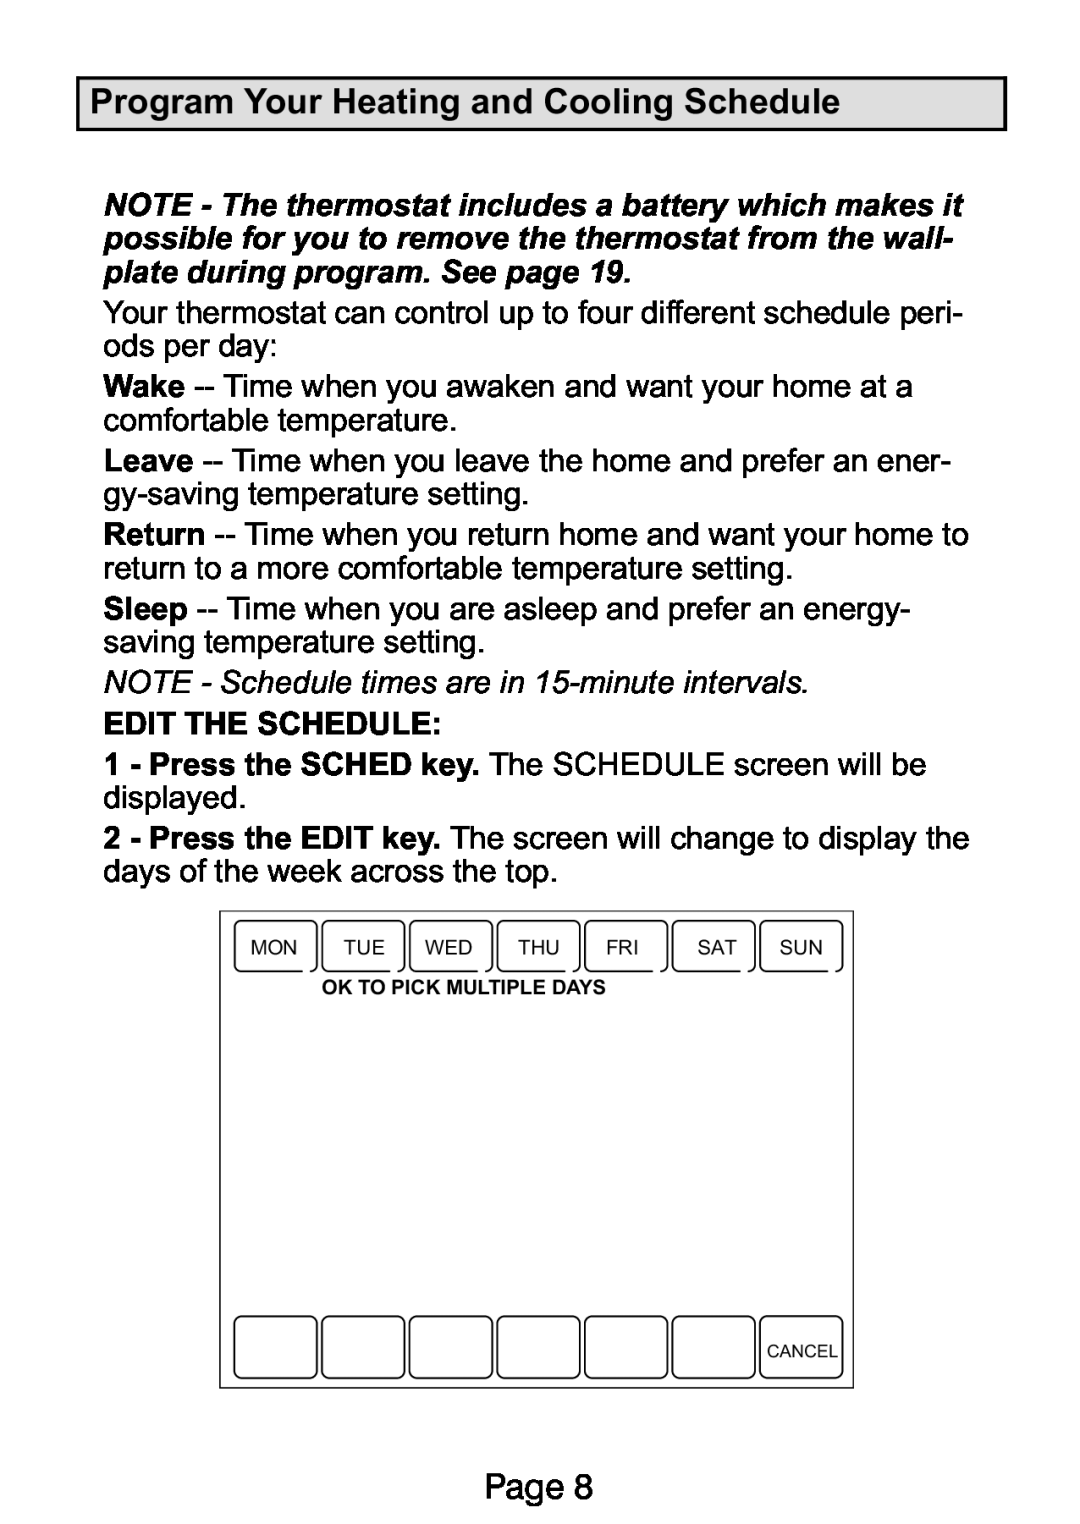 Lennox International Inc Ellite Series manual Program Your Heating and Cooling Schedule, Page 